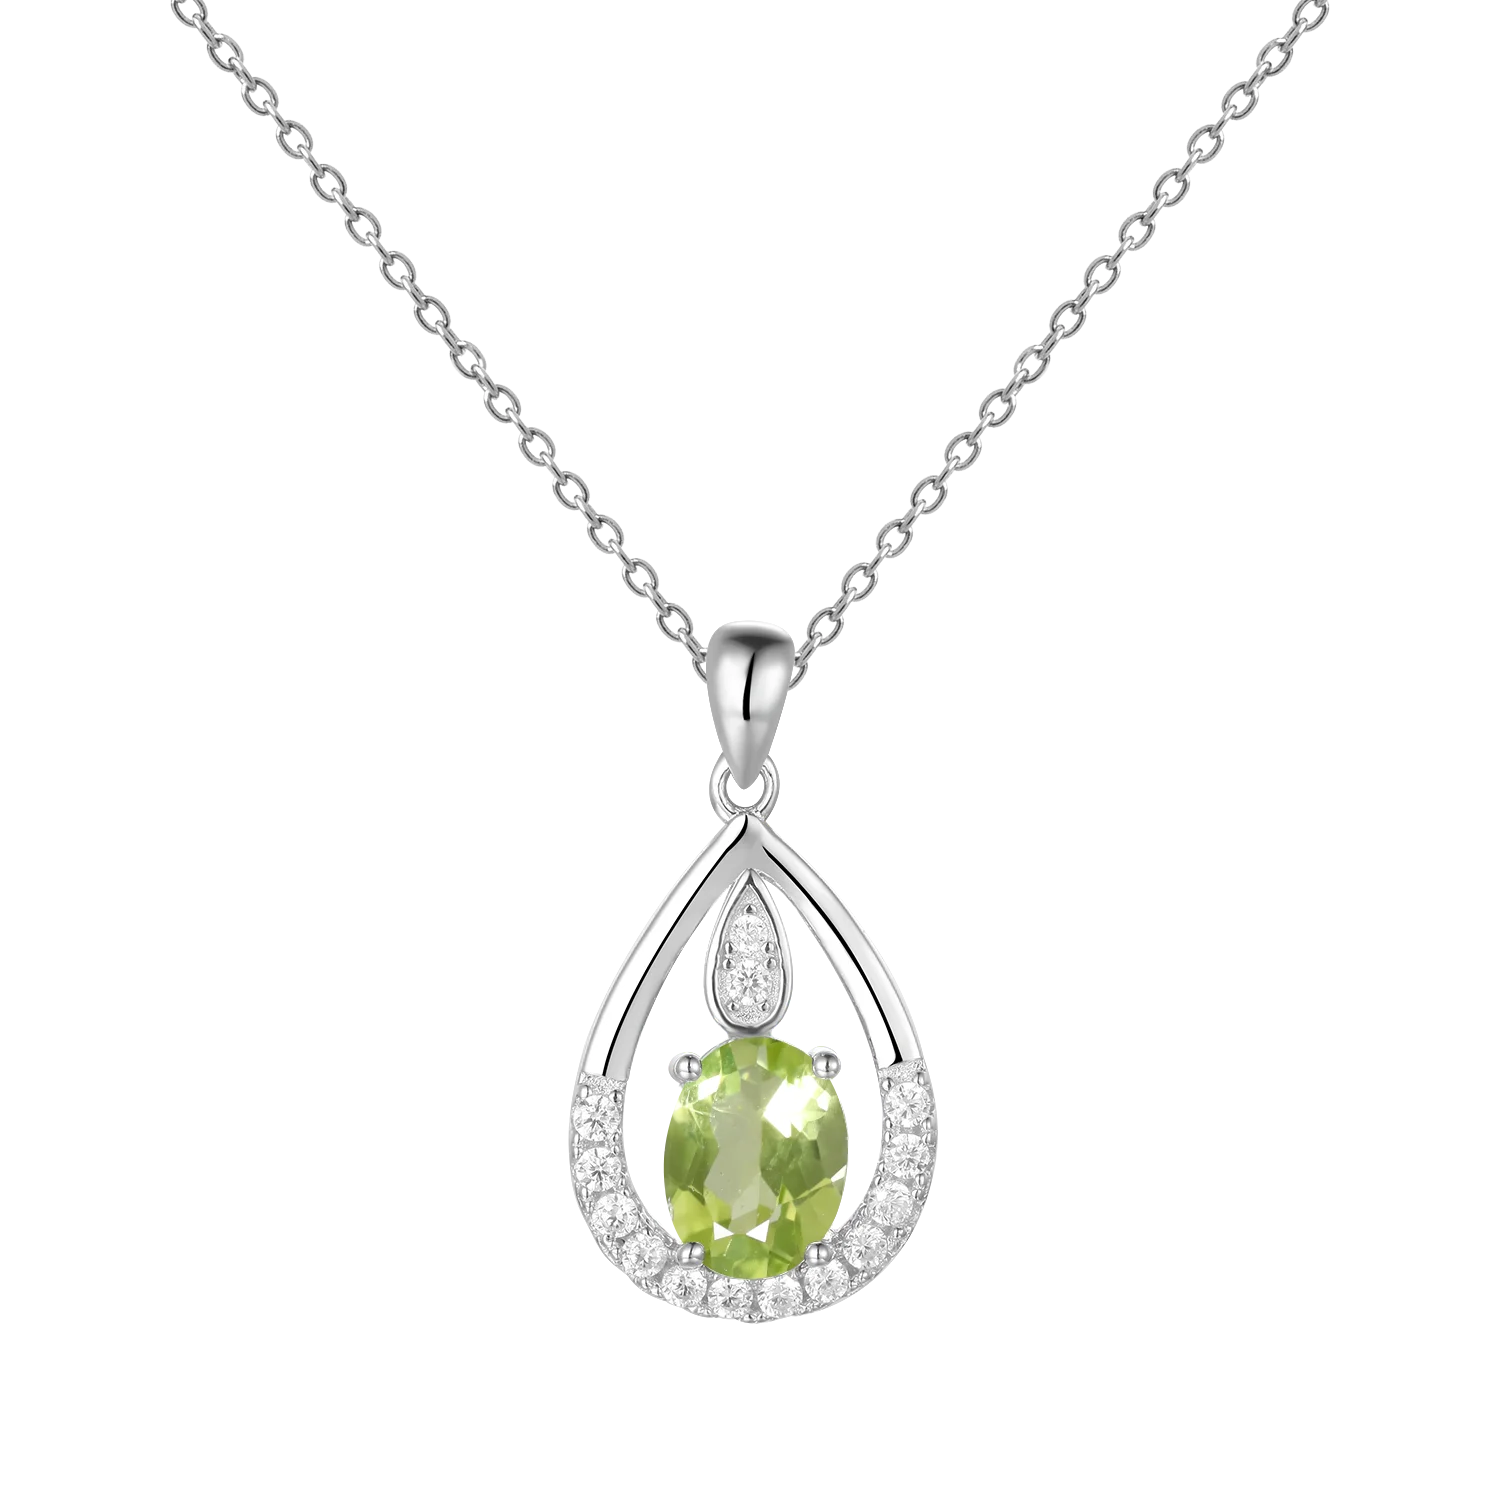 Gem's Ballet December Birthstone Topaz Necklace 6x8mm Oval Pink Topaz Pendant Necklace in 925 Sterling Silver with 18" Chain Peridot